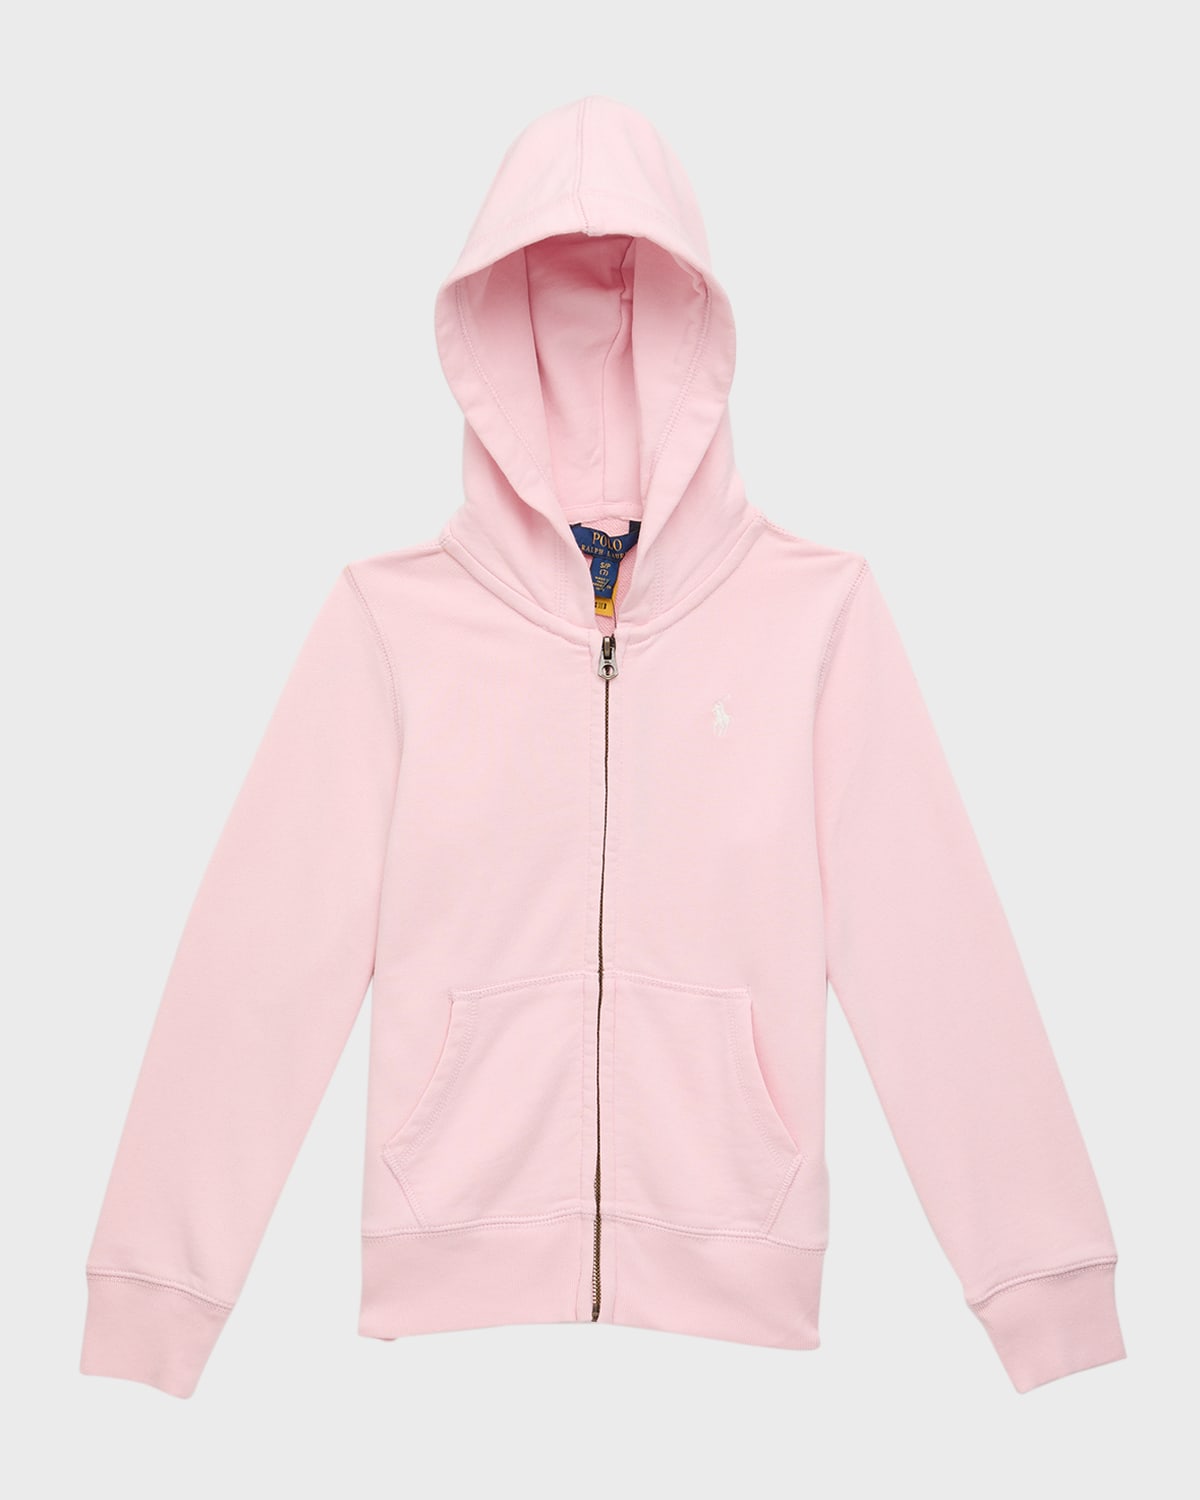 Ralph Lauren Kids' Girl's Classic Embroidered Pony Hoodie In Hint Of Pink